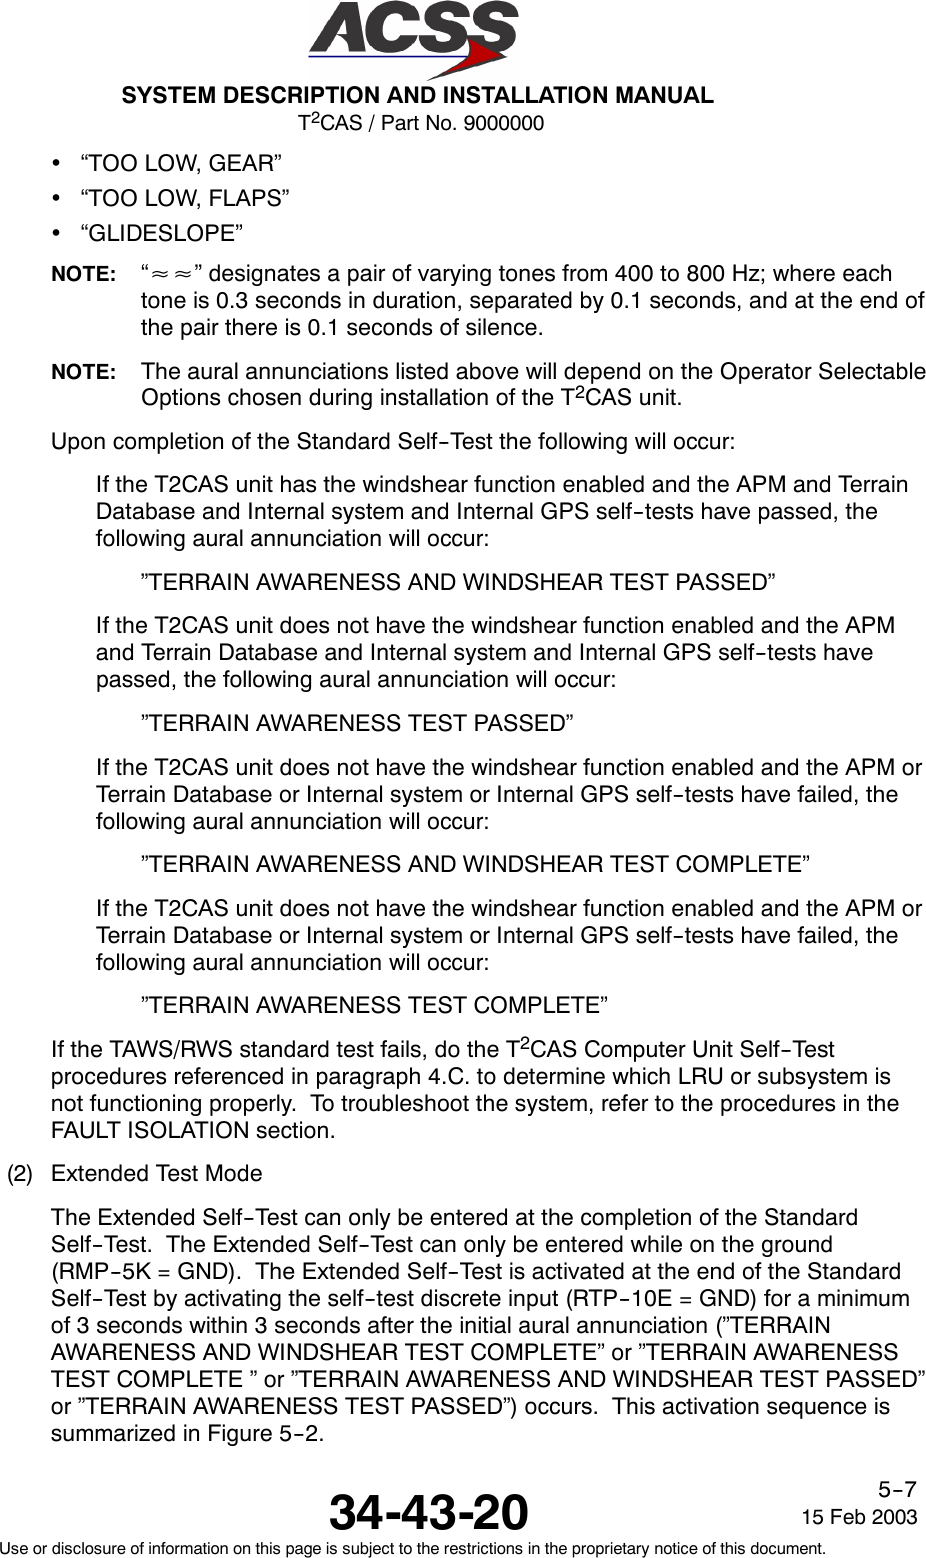 T2CAS / Part No. 9000000SYSTEM DESCRIPTION AND INSTALLATION MANUAL34-43-20 15 Feb 2003Use or disclosure of information on this page is subject to the restrictions in the proprietary notice of this document.5--7•“TOO LOW, GEAR”•“TOO LOW, FLAPS”•“GLIDESLOPE”NOTE: “≈≈” designates a pair of varying tones from 400 to 800 Hz; where eachtone is 0.3 seconds in duration, separated by 0.1 seconds, and at the end ofthe pair there is 0.1 seconds of silence.NOTE: The aural annunciations listed above will depend on the Operator SelectableOptions chosen during installation of the T2CAS unit.Upon completion of the Standard Self--Test the following will occur:If the T2CAS unit has the windshear function enabled and the APM and TerrainDatabase and Internal system and Internal GPS self--tests have passed, thefollowing aural annunciation will occur:”TERRAIN AWARENESS AND WINDSHEAR TEST PASSED”If the T2CAS unit does not have the windshear function enabled and the APMand Terrain Database and Internal system and Internal GPS self--tests havepassed, the following aural annunciation will occur:”TERRAIN AWARENESS TEST PASSED”If the T2CAS unit does not have the windshear function enabled and the APM orTerrain Database or Internal system or Internal GPS self--tests have failed, thefollowing aural annunciation will occur:”TERRAIN AWARENESS AND WINDSHEAR TEST COMPLETE”If the T2CAS unit does not have the windshear function enabled and the APM orTerrain Database or Internal system or Internal GPS self--tests have failed, thefollowing aural annunciation will occur:”TERRAIN AWARENESS TEST COMPLETE”If the TAWS/RWS standard test fails, do the T2CAS Computer Unit Self--Testprocedures referenced in paragraph 4.C. to determine which LRU or subsystem isnot functioning properly. To troubleshoot the system, refer to the procedures in theFAULT ISOLATION section.(2) Extended Test ModeThe Extended Self--Test can only be entered at the completion of the StandardSelf--Test. The Extended Self--Test can only be entered while on the ground(RMP--5K = GND). The Extended Self--Test is activated at the end of the StandardSelf--Test by activating the self--test discrete input (RTP--10E = GND) for a minimumof 3 seconds within 3 seconds after the initial aural annunciation (”TERRAINAWARENESS AND WINDSHEAR TEST COMPLETE” or ”TERRAIN AWARENESSTEST COMPLETE ” or ”TERRAIN AWARENESS AND WINDSHEAR TEST PASSED”or ”TERRAIN AWARENESS TEST PASSED”) occurs. This activation sequence issummarizedinFigure5--2.